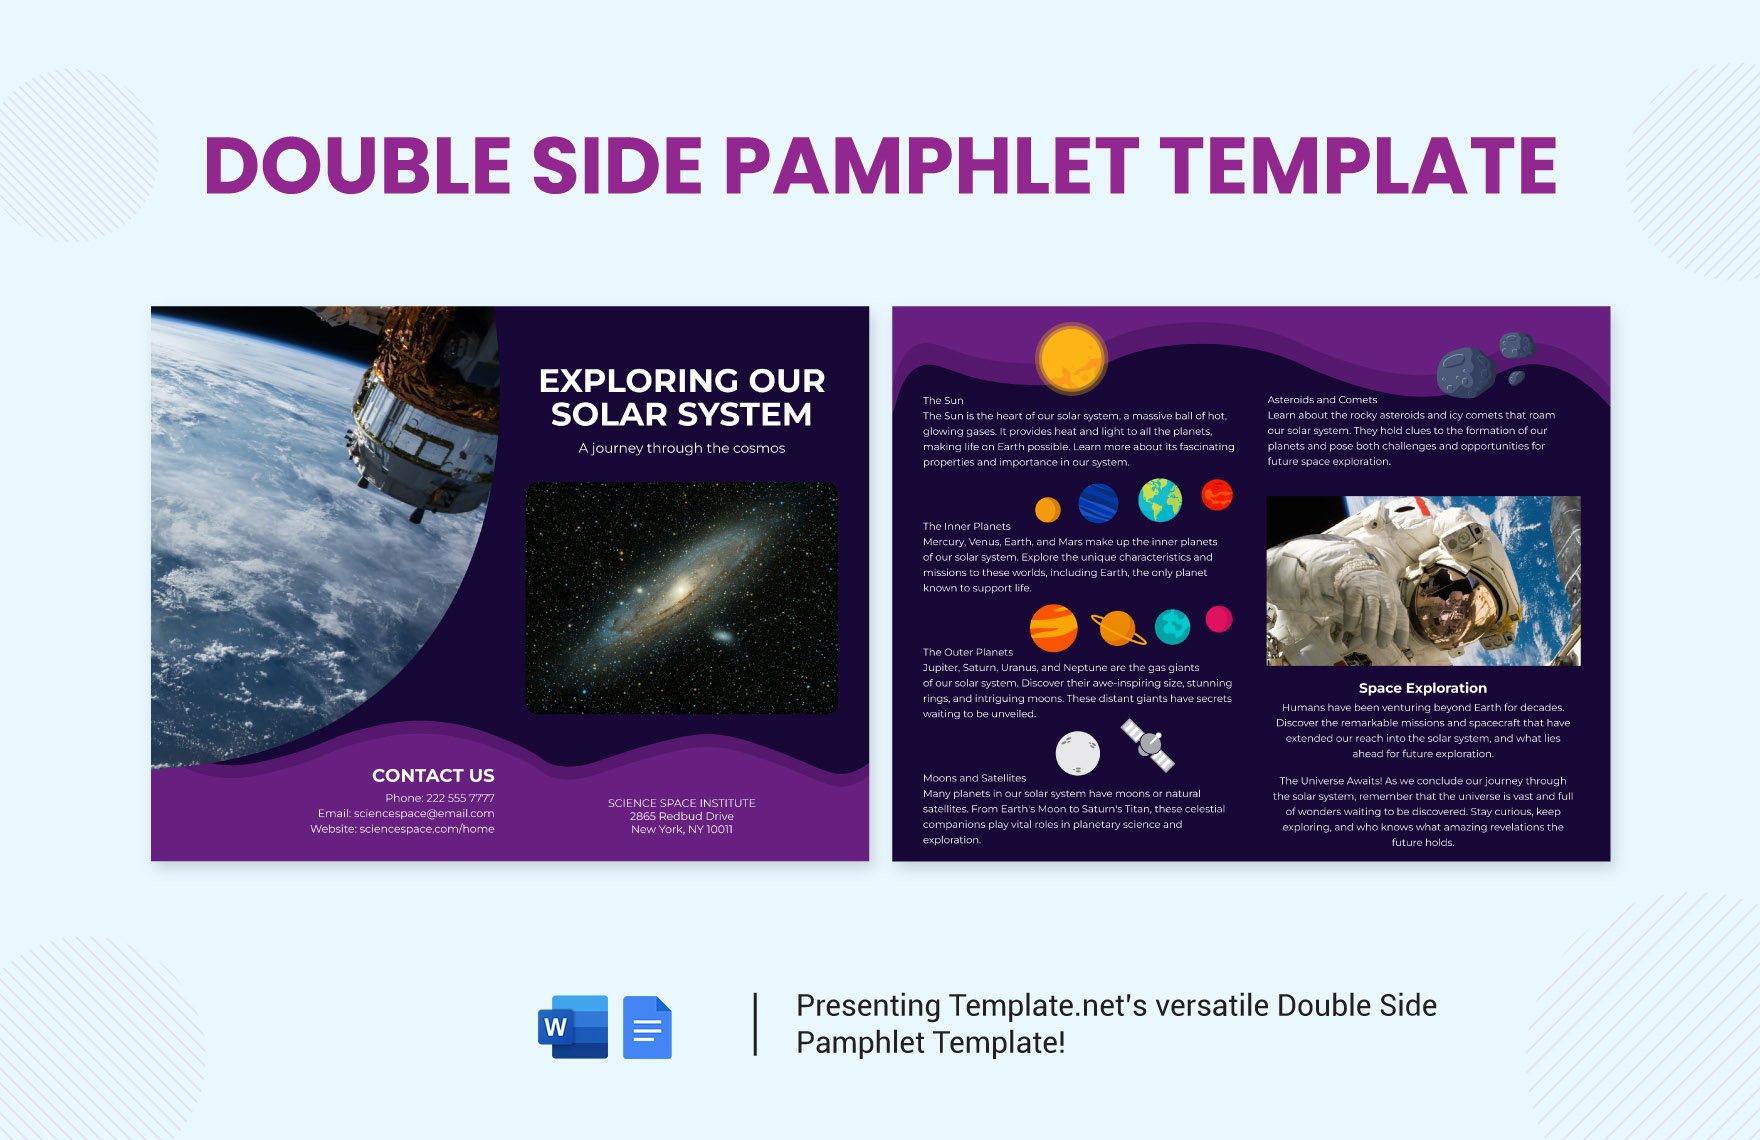 Double Side Pamphlet Template in Word, Google Docs